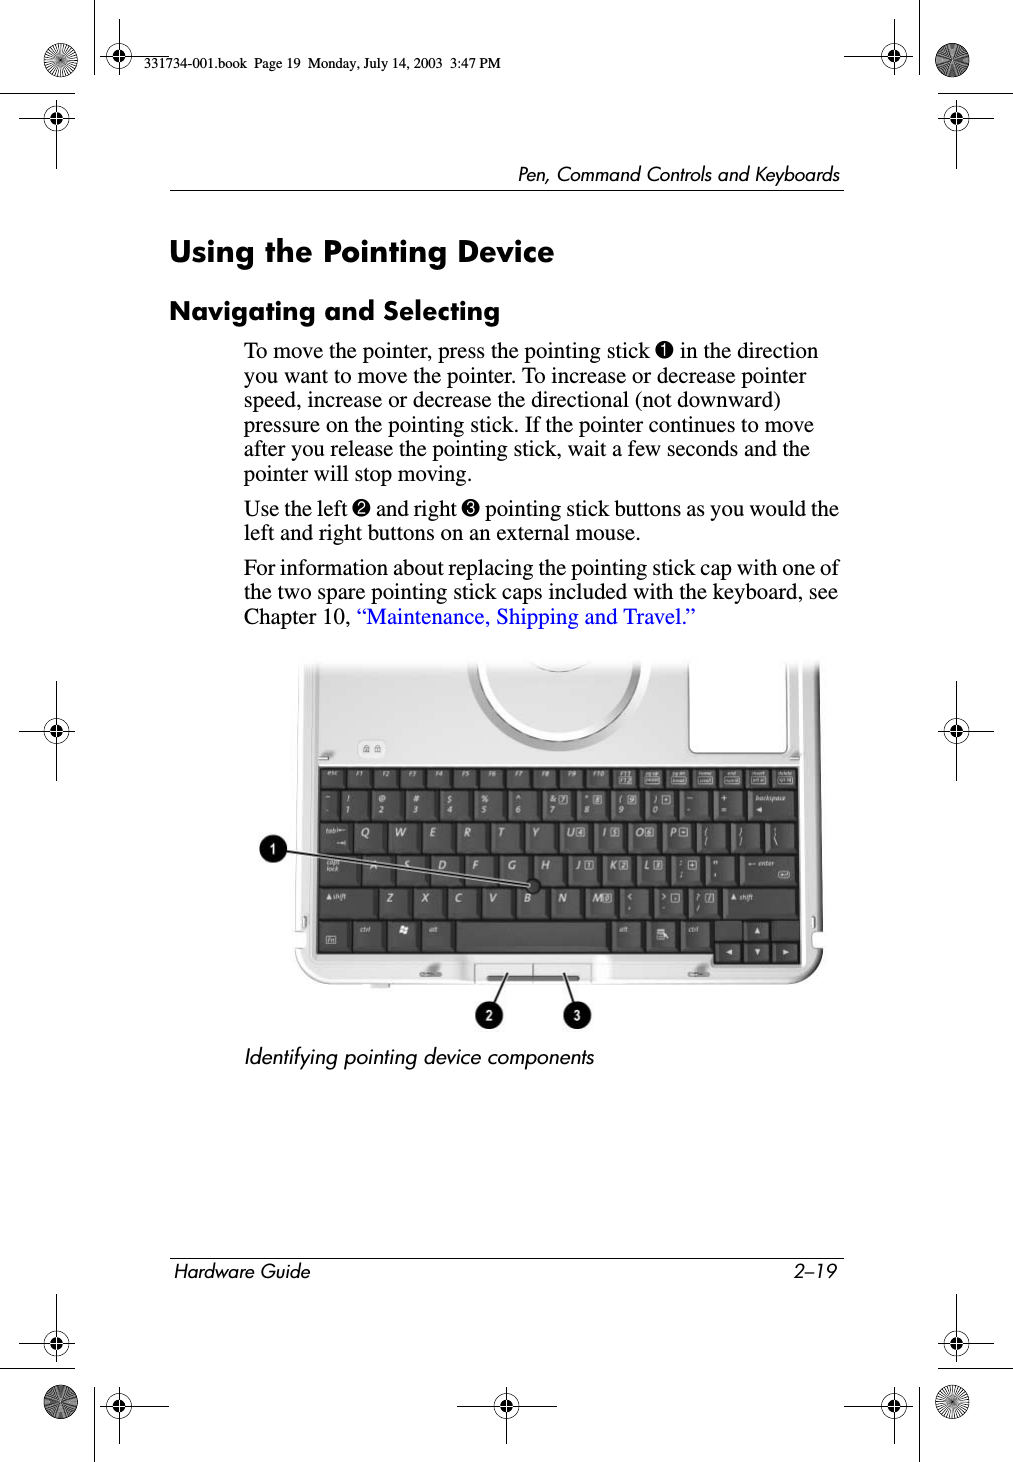 Pen, Command Controls and KeyboardsHardware Guide 2–19Using the Pointing DeviceNavigating and SelectingTo move the pointer, press the pointing stick 1 in the direction you want to move the pointer. To increase or decrease pointer speed, increase or decrease the directional (not downward) pressure on the pointing stick. If the pointer continues to move after you release the pointing stick, wait a few seconds and the pointer will stop moving.Use the left 2 and right 3 pointing stick buttons as you would the left and right buttons on an external mouse.For information about replacing the pointing stick cap with one of the two spare pointing stick caps included with the keyboard, see Chapter 10, “Maintenance, Shipping and Travel.”Identifying pointing device components331734-001.book  Page 19  Monday, July 14, 2003  3:47 PM